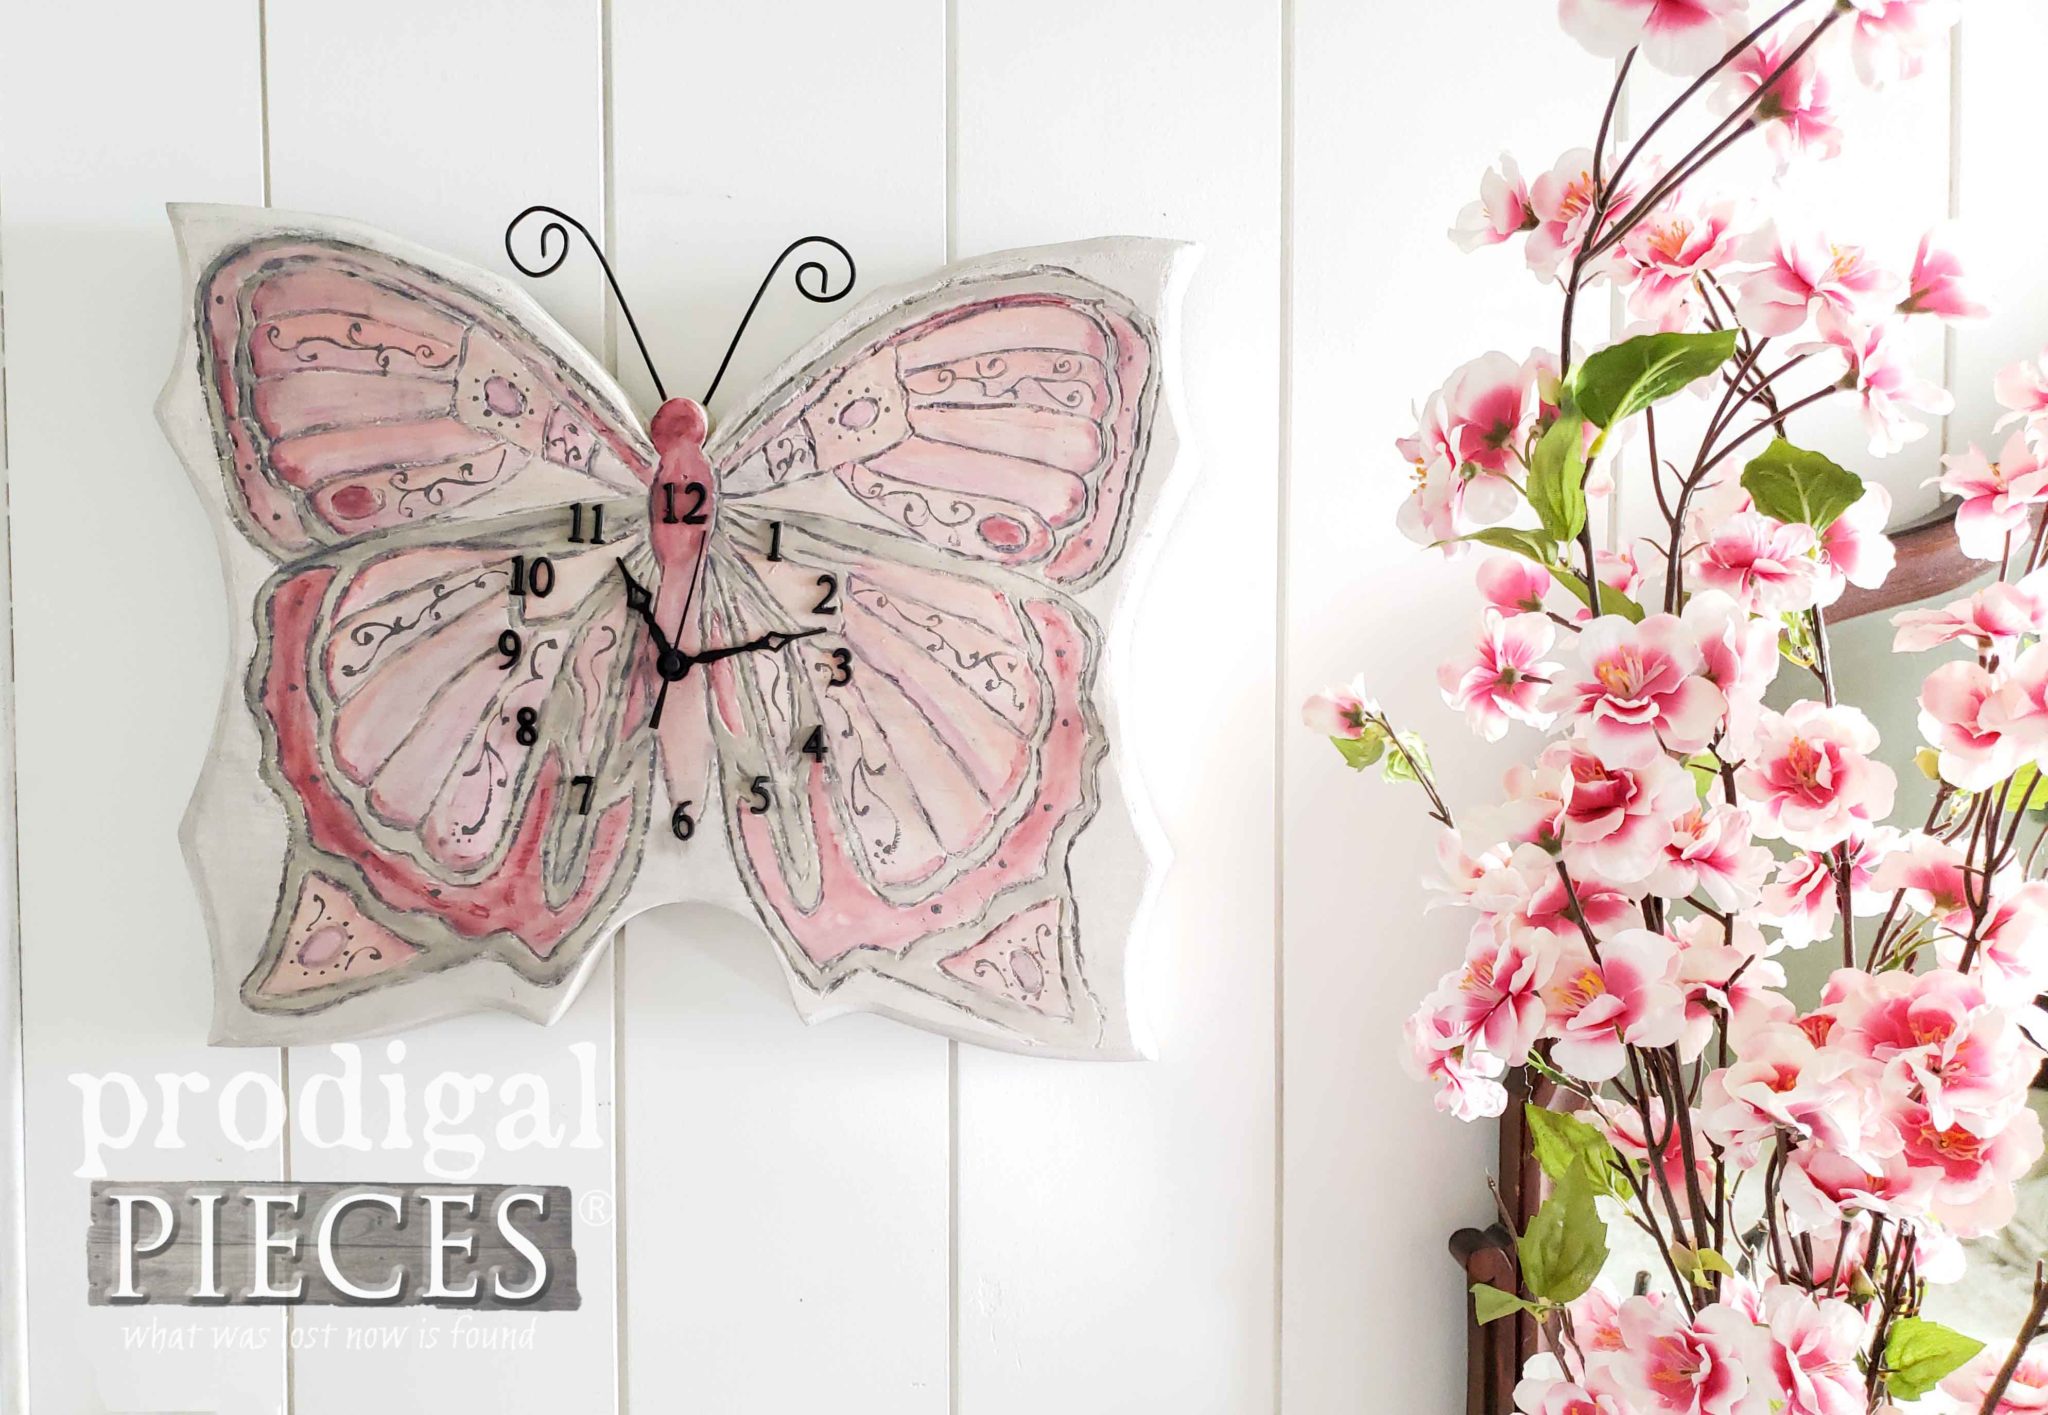 Hand-Painted Wooden Butterfly Wall Clock by Larissa of Prodigal Pieces | prodigalpieces.com